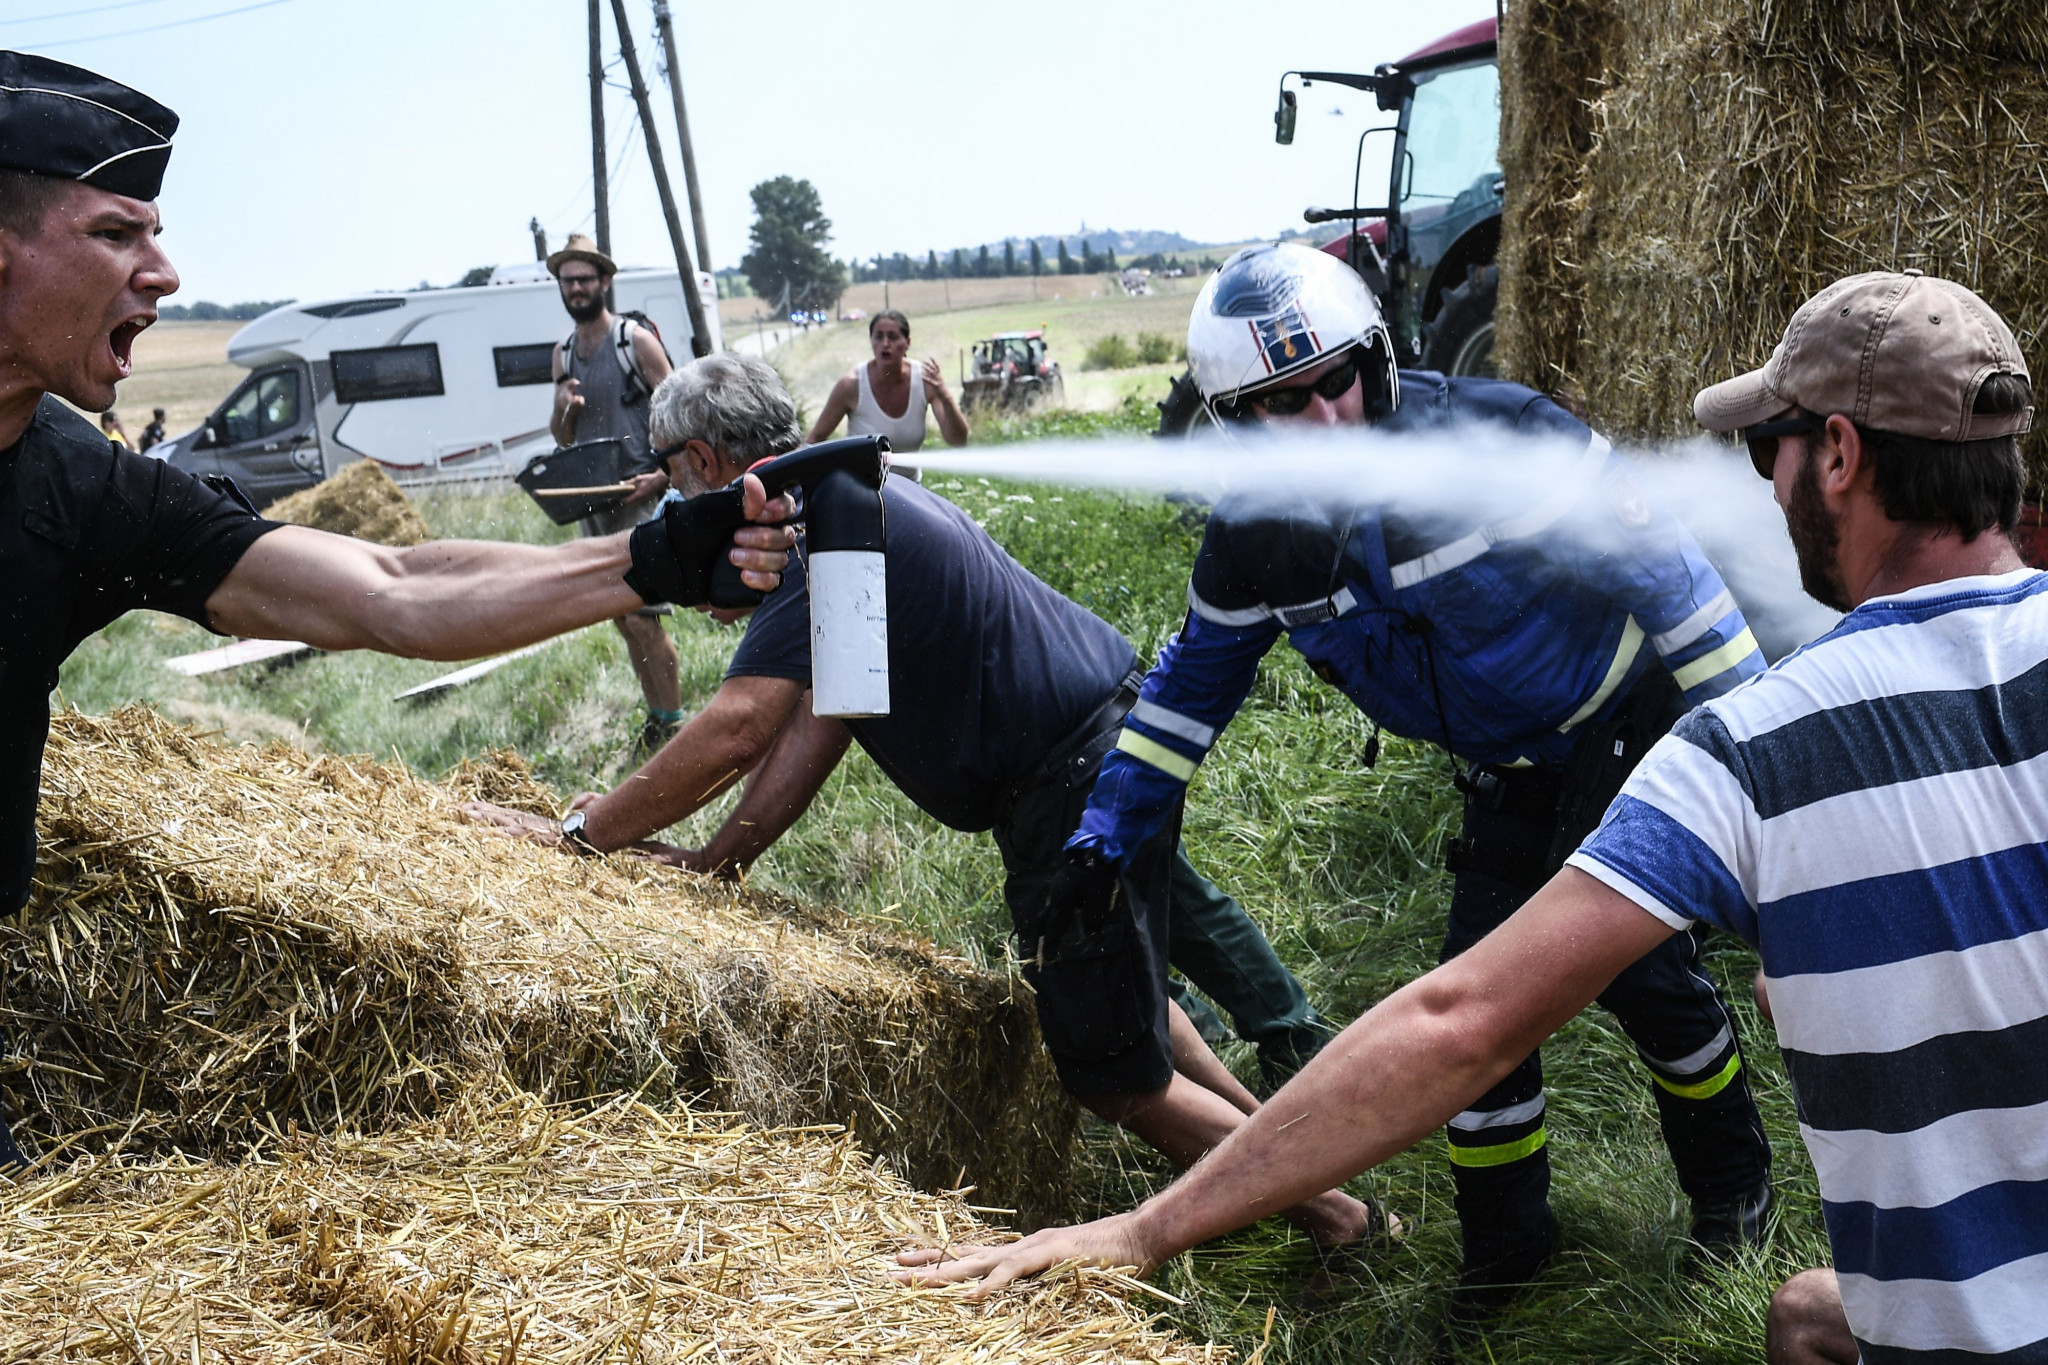 A protest by farmers delayed the stage while spray led to riders seeking treatment ©Getty Images